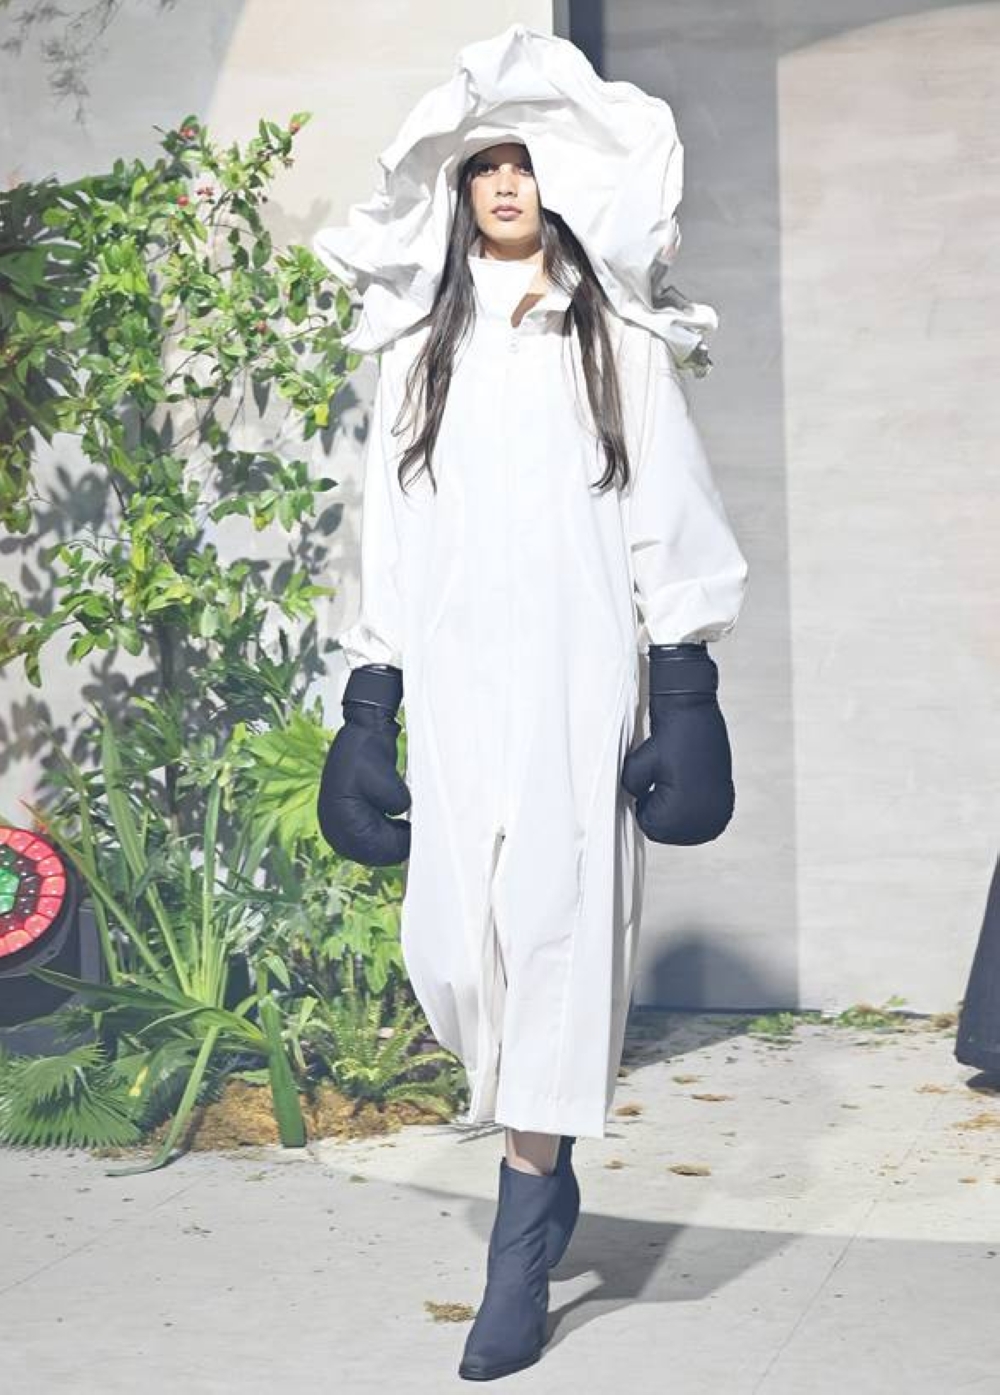 Breaking the dark and gloomy ensemble was a single white dress that formed a cloud-like hood on top.